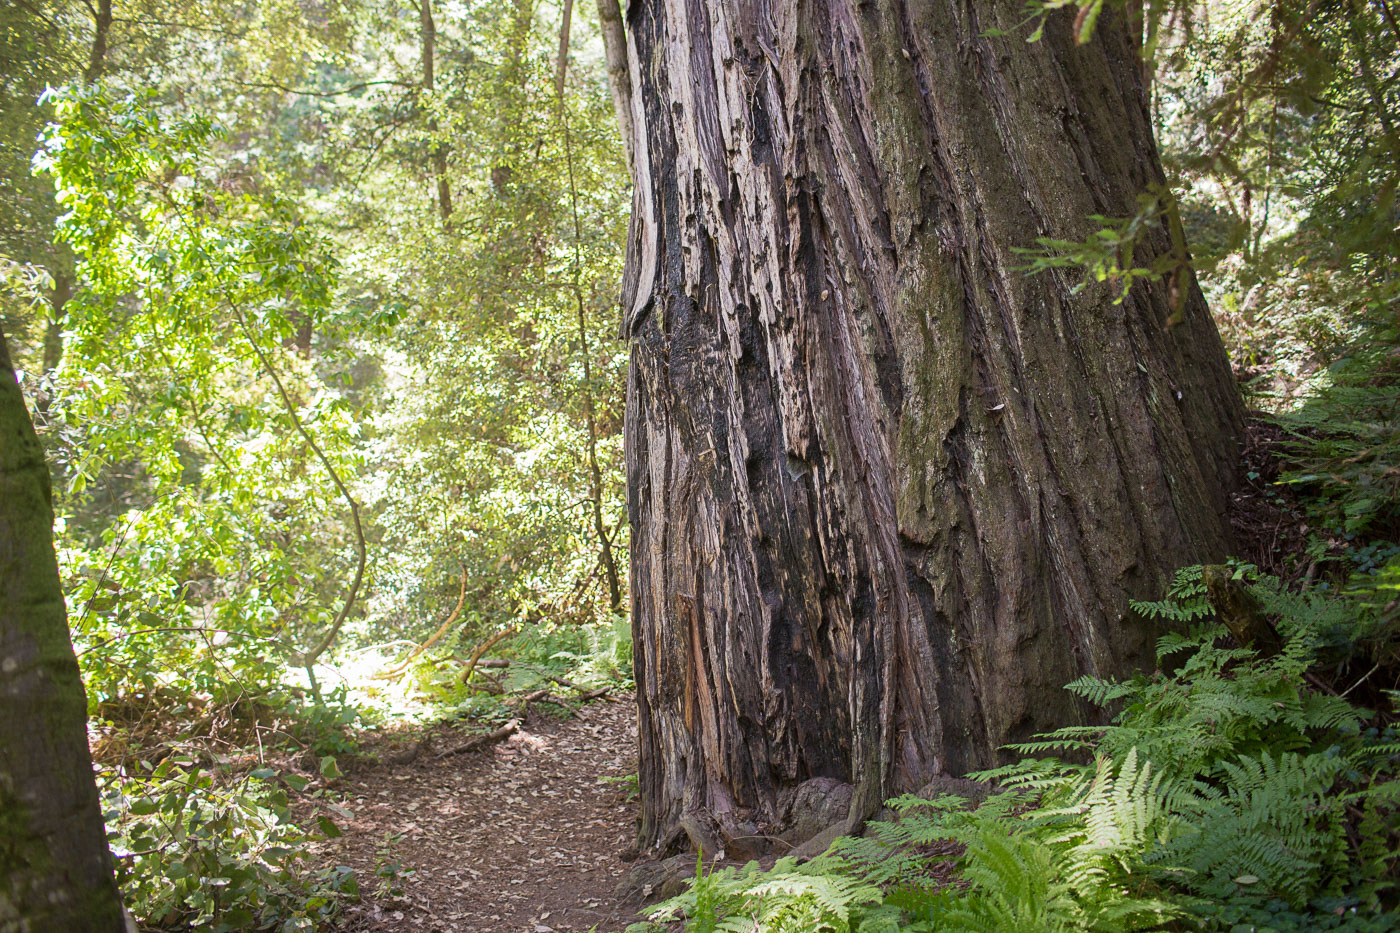 Forest of Nisene Marks Advocate Tree, 260 Feet Tall, over 1000 years old